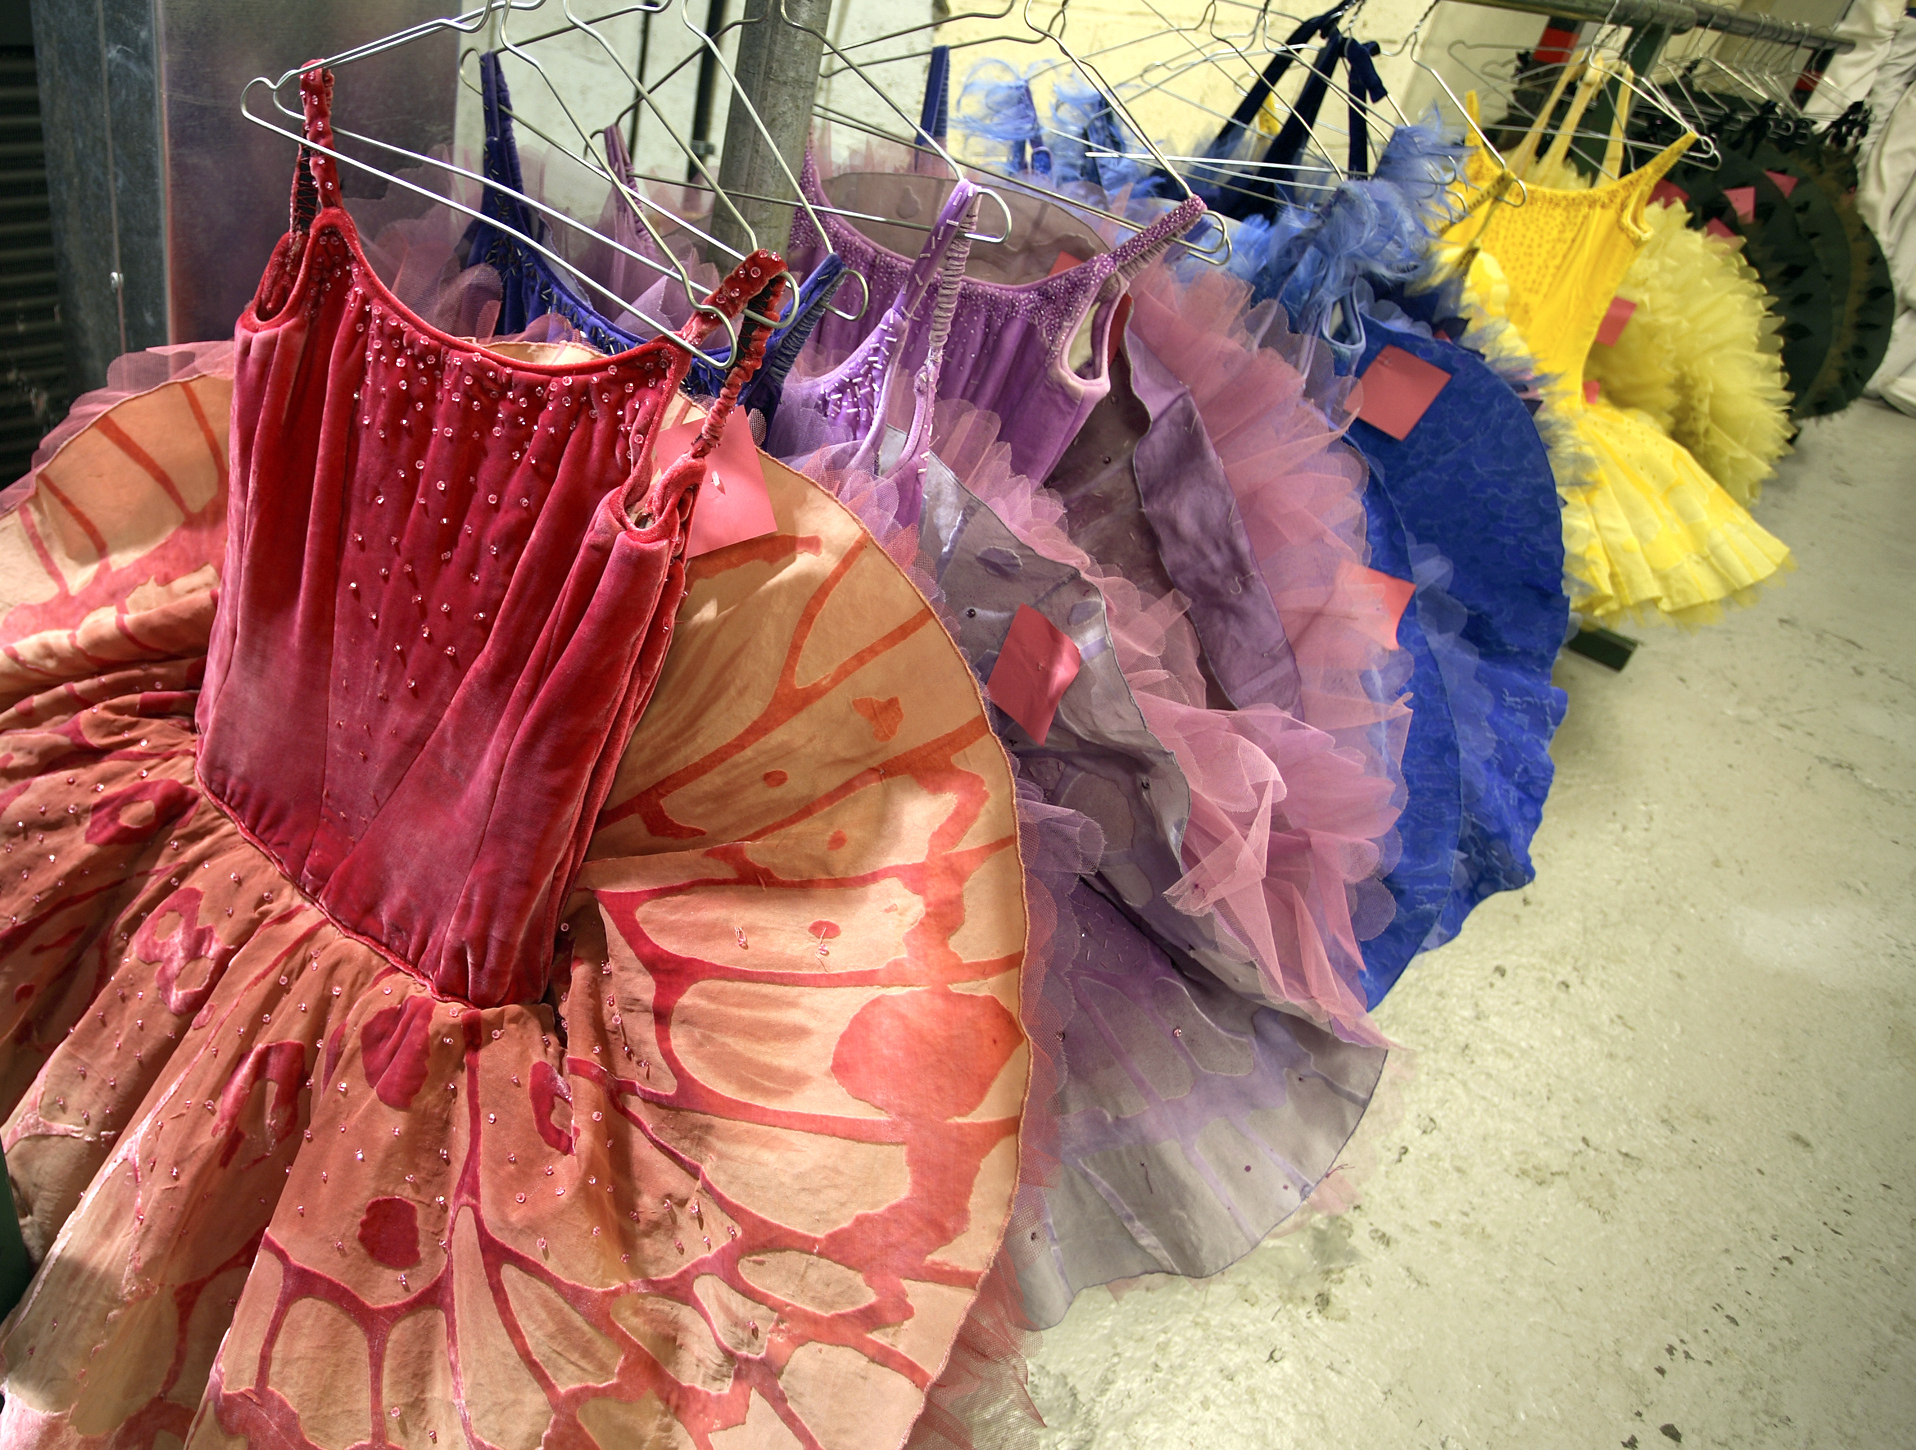 A row of tutus hanging on hangers backstage.